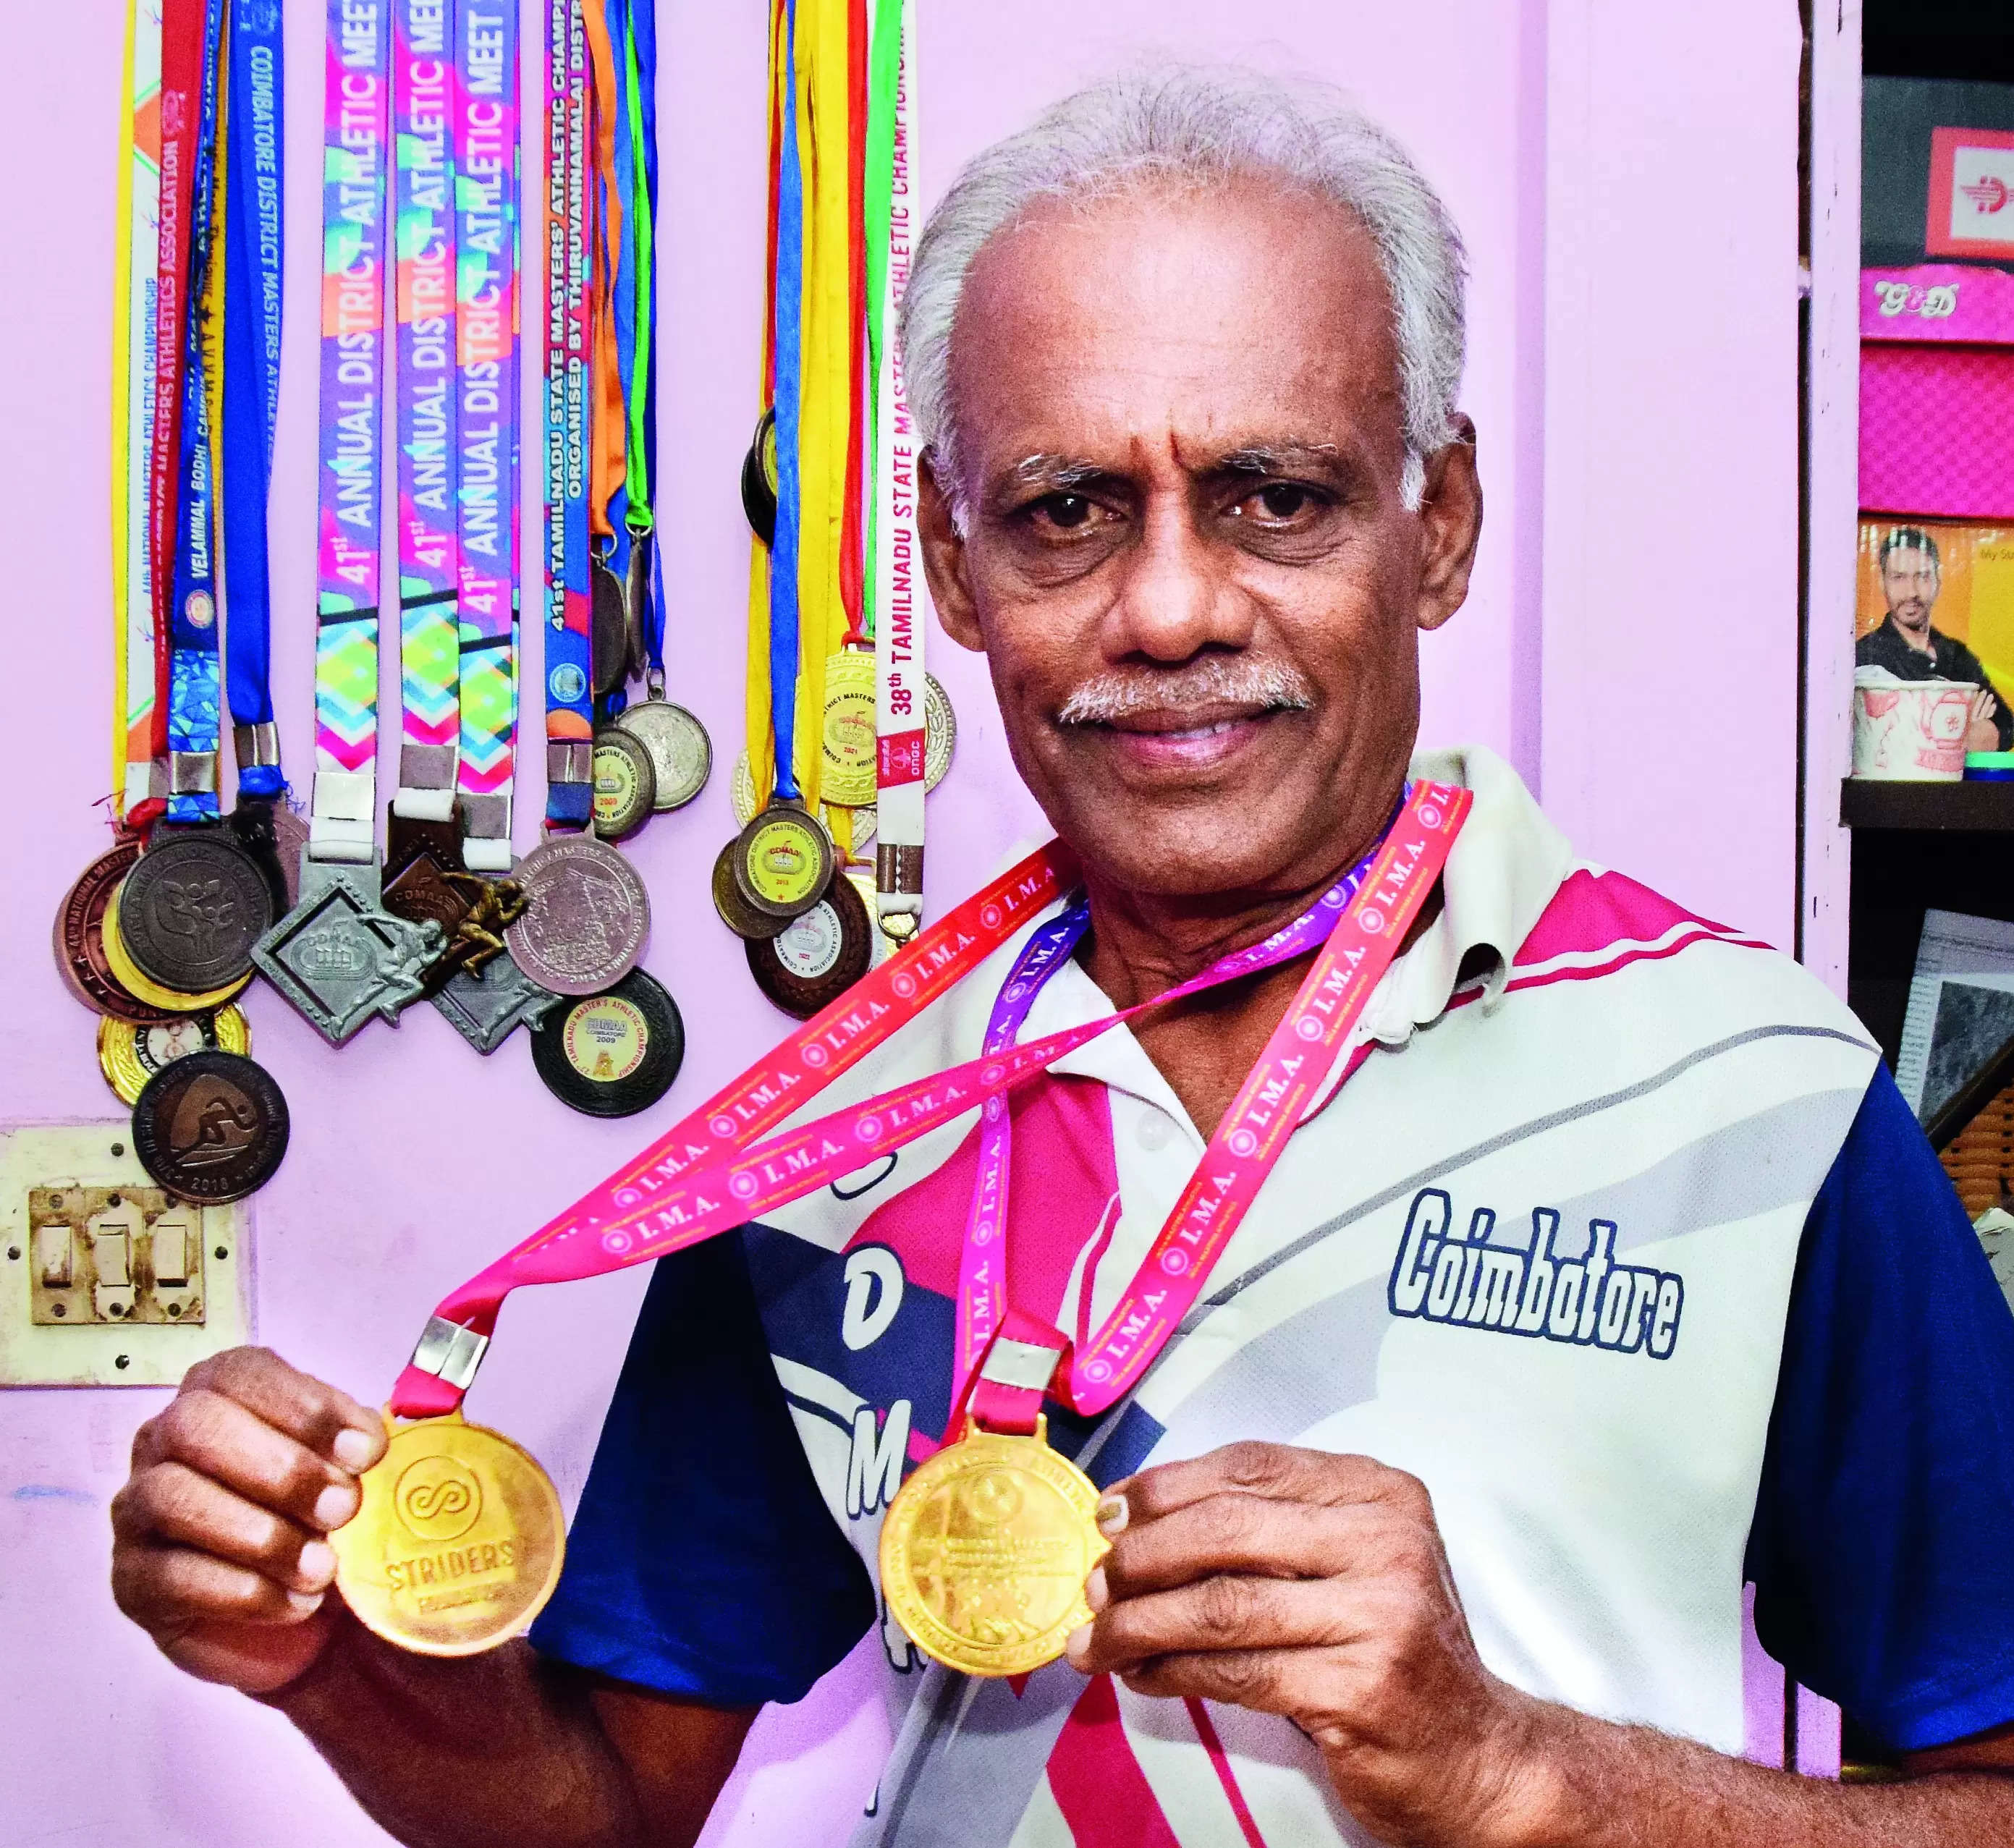 67-year-old athlete from district shines at National Masters Athletics Championship